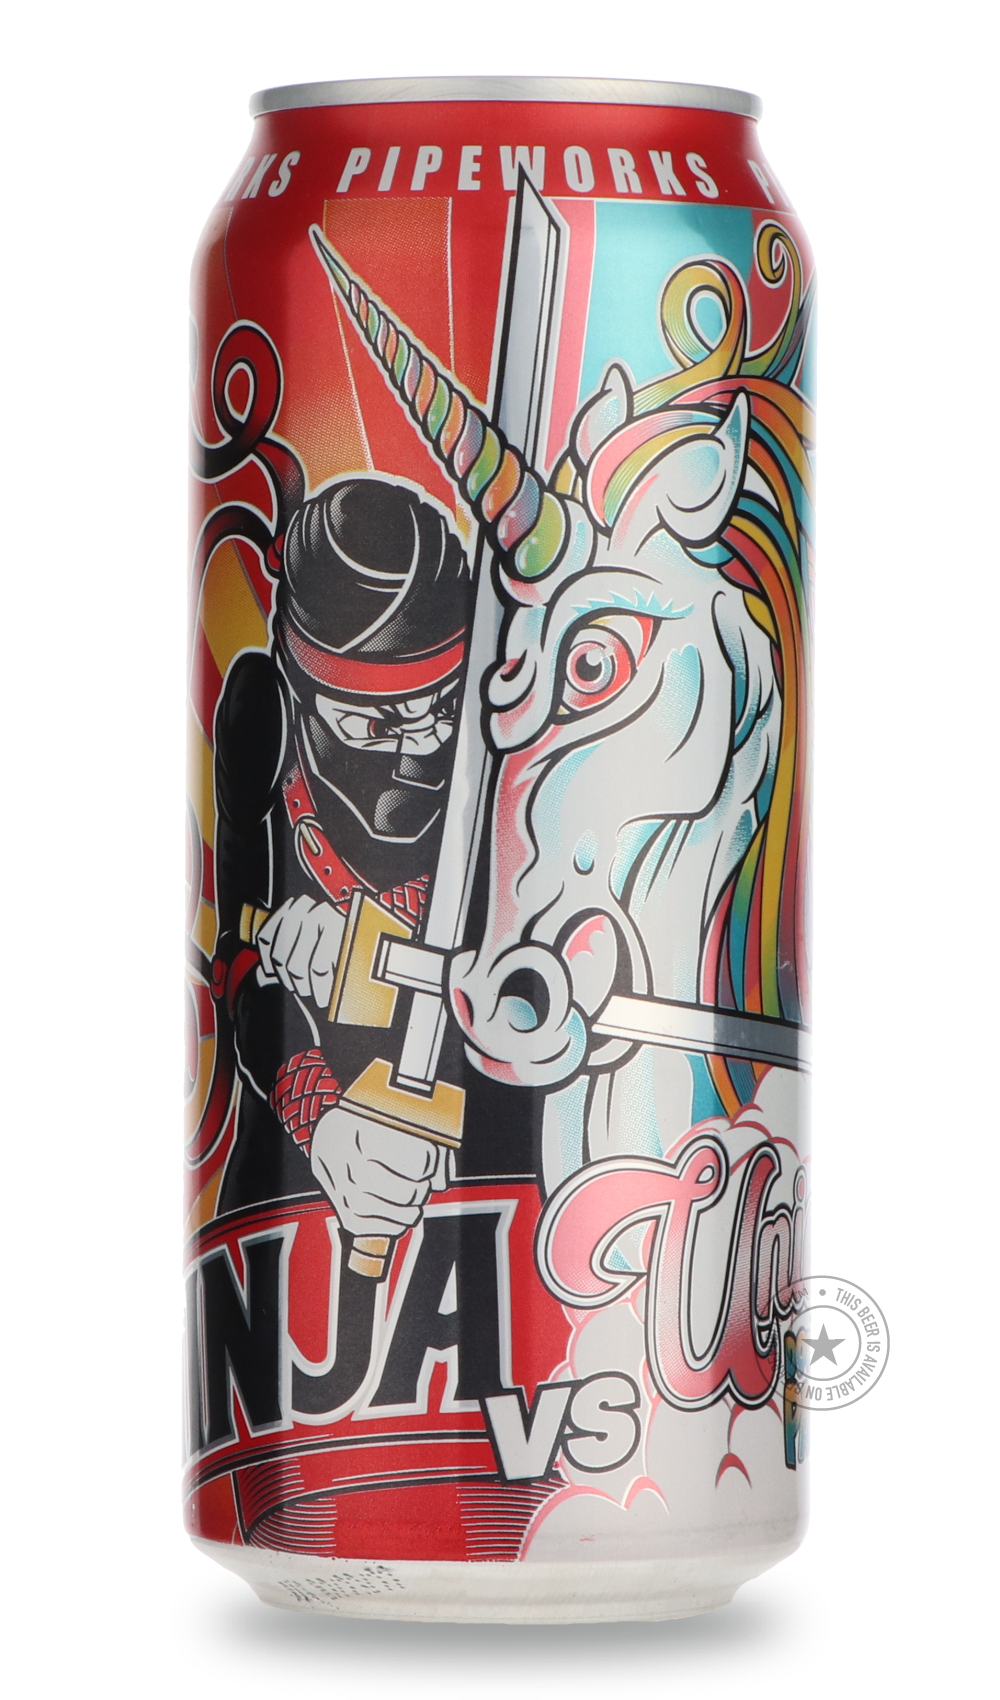 -Pipeworks- Ninja vs. Unicorn-IPA- Only @ Beer Republic - The best online beer store for American & Canadian craft beer - Buy beer online from the USA and Canada - Bier online kopen - Amerikaans bier kopen - Craft beer store - Craft beer kopen - Amerikanisch bier kaufen - Bier online kaufen - Acheter biere online - IPA - Stout - Porter - New England IPA - Hazy IPA - Imperial Stout - Barrel Aged - Barrel Aged Imperial Stout - Brown - Dark beer - Blond - Blonde - Pilsner - Lager - Wheat - Weizen - Amber - Bar